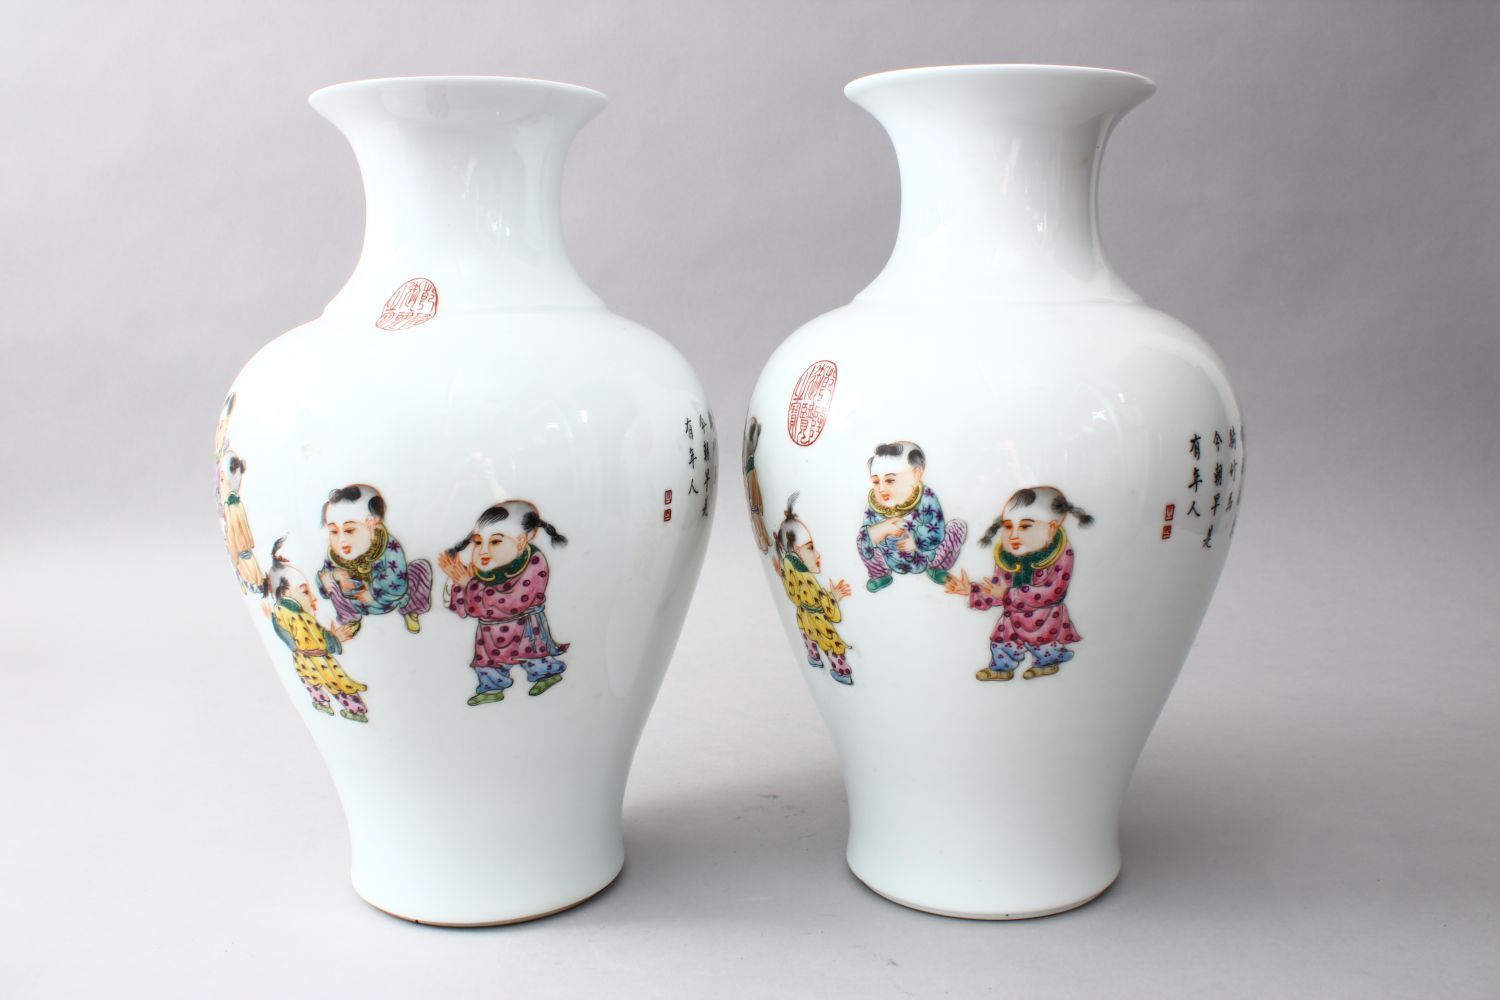 A PAIR OF CHINESE REPUBLIC PERIOD FAMILLE ROSE PORCELAIN VASES OF BOYS PLAYING, the body of the - Image 4 of 6